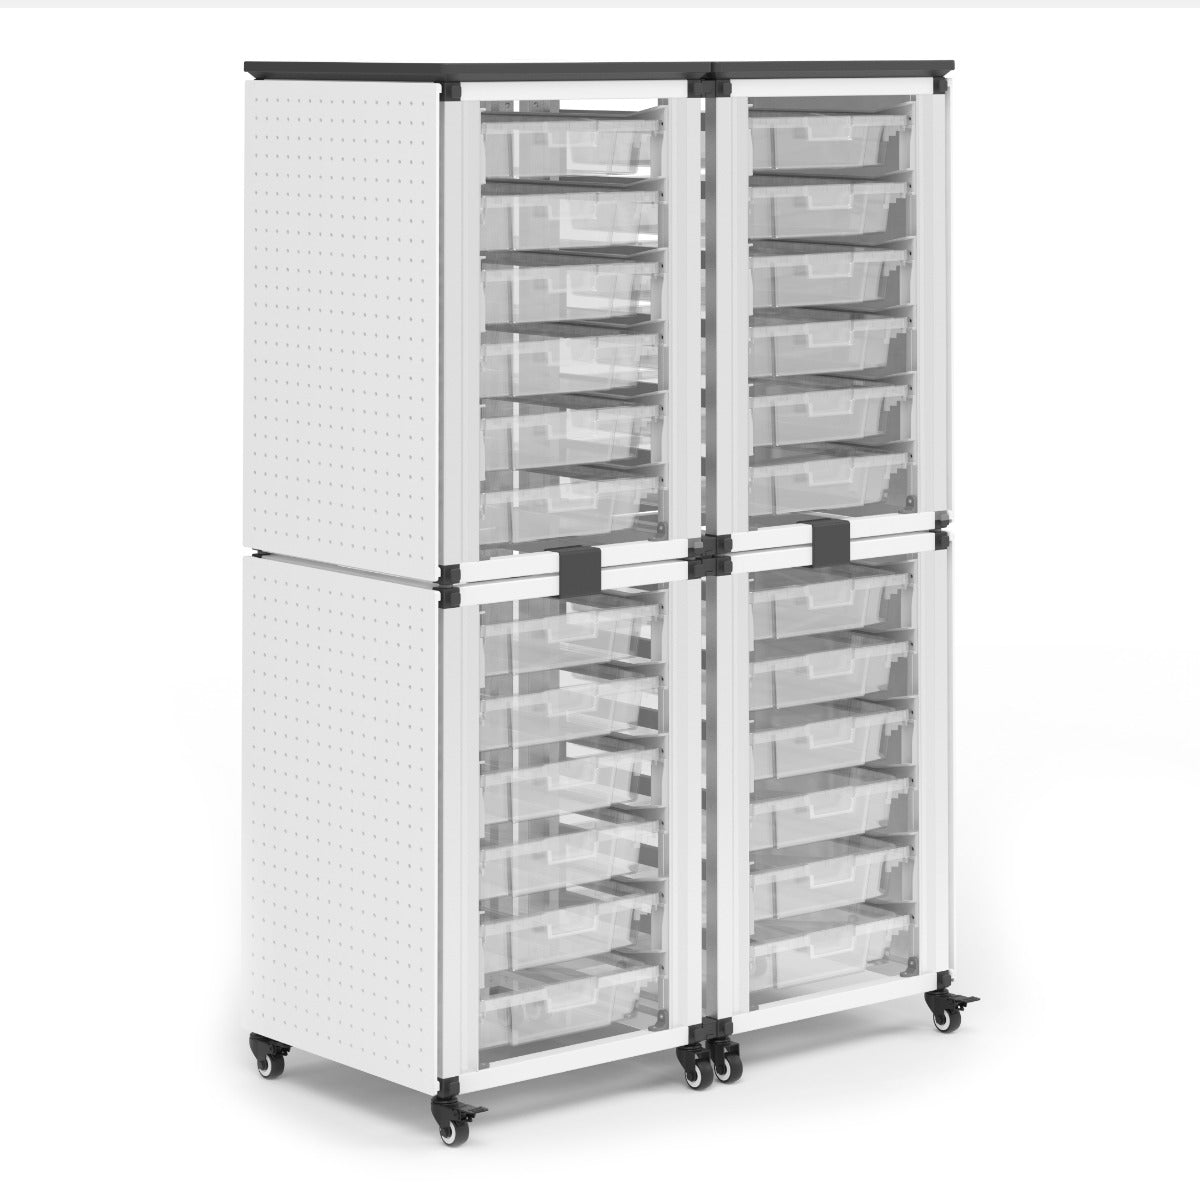 Luxor Modular Classroom Storage Cabinet - 4 stacked modules with 24 small bins (LUX-MBS-STR-22-24S) - SchoolOutlet